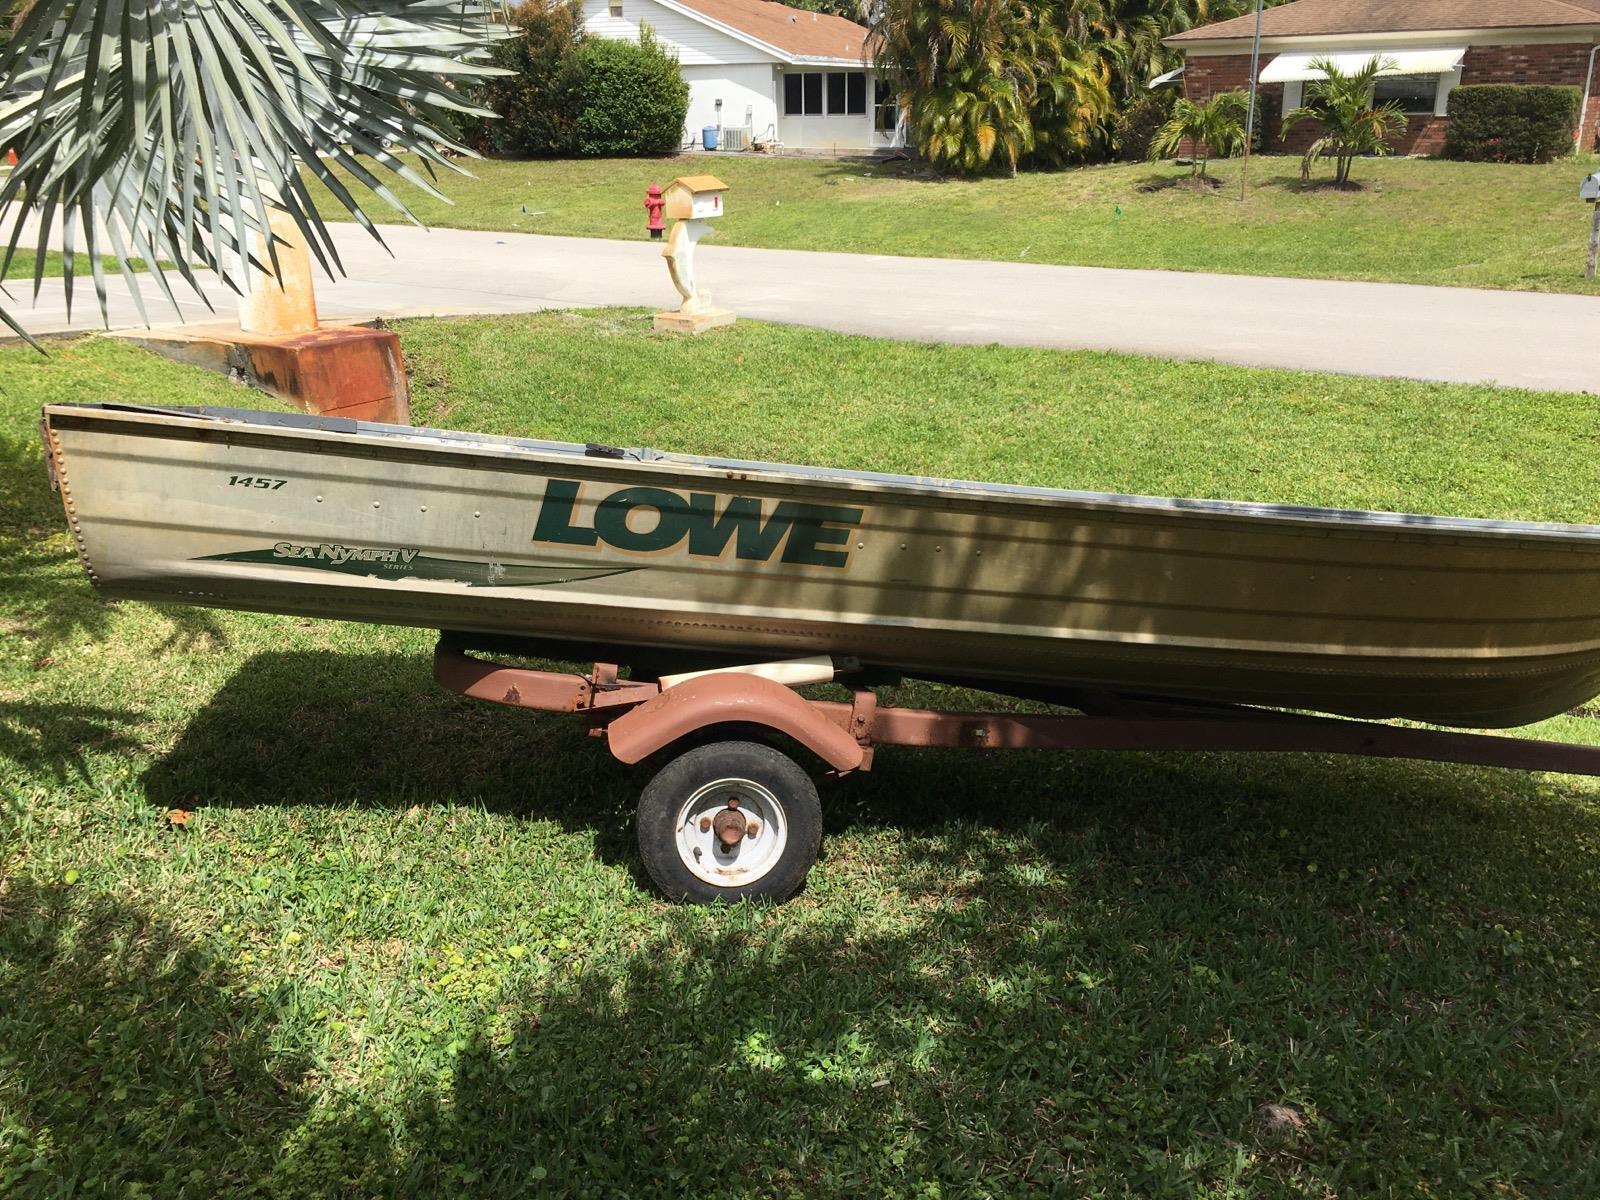 Owner 2006 1457 Lowe Sea Nymph 14' Boat Located in Port Saint Lucie, FL